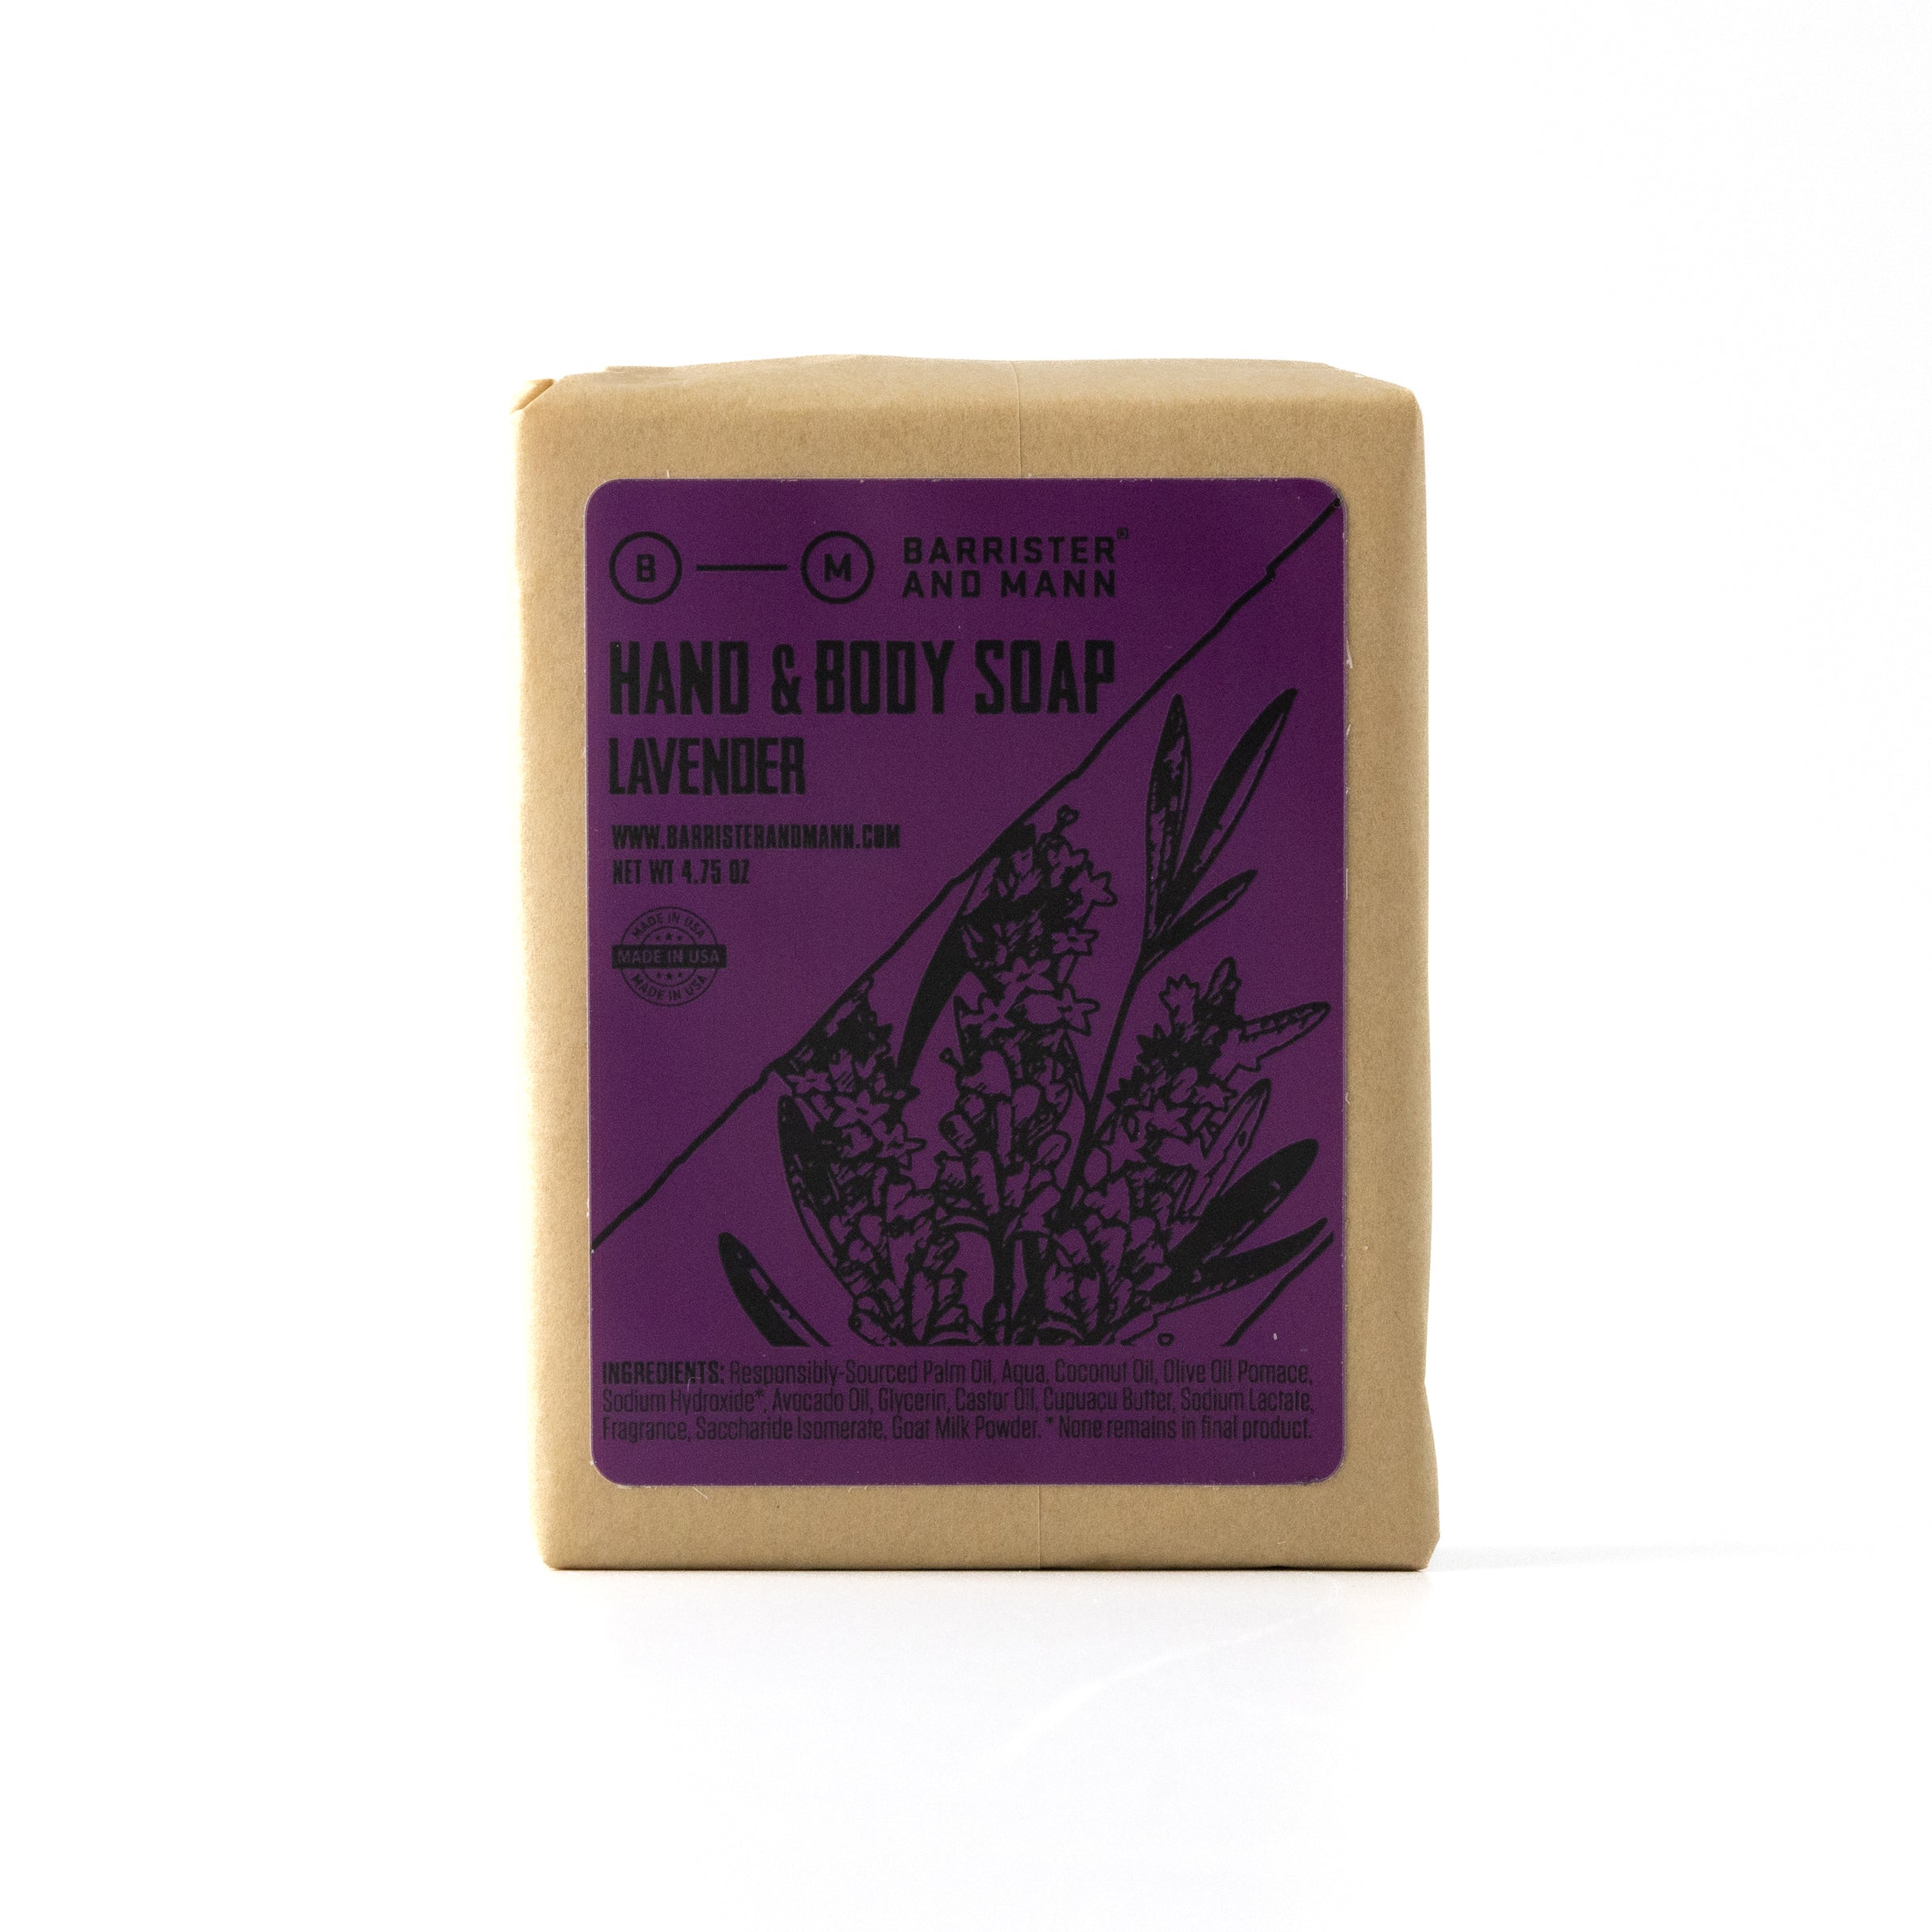 Hand & Body Soap: Lavender - Barrister and Mann LLC